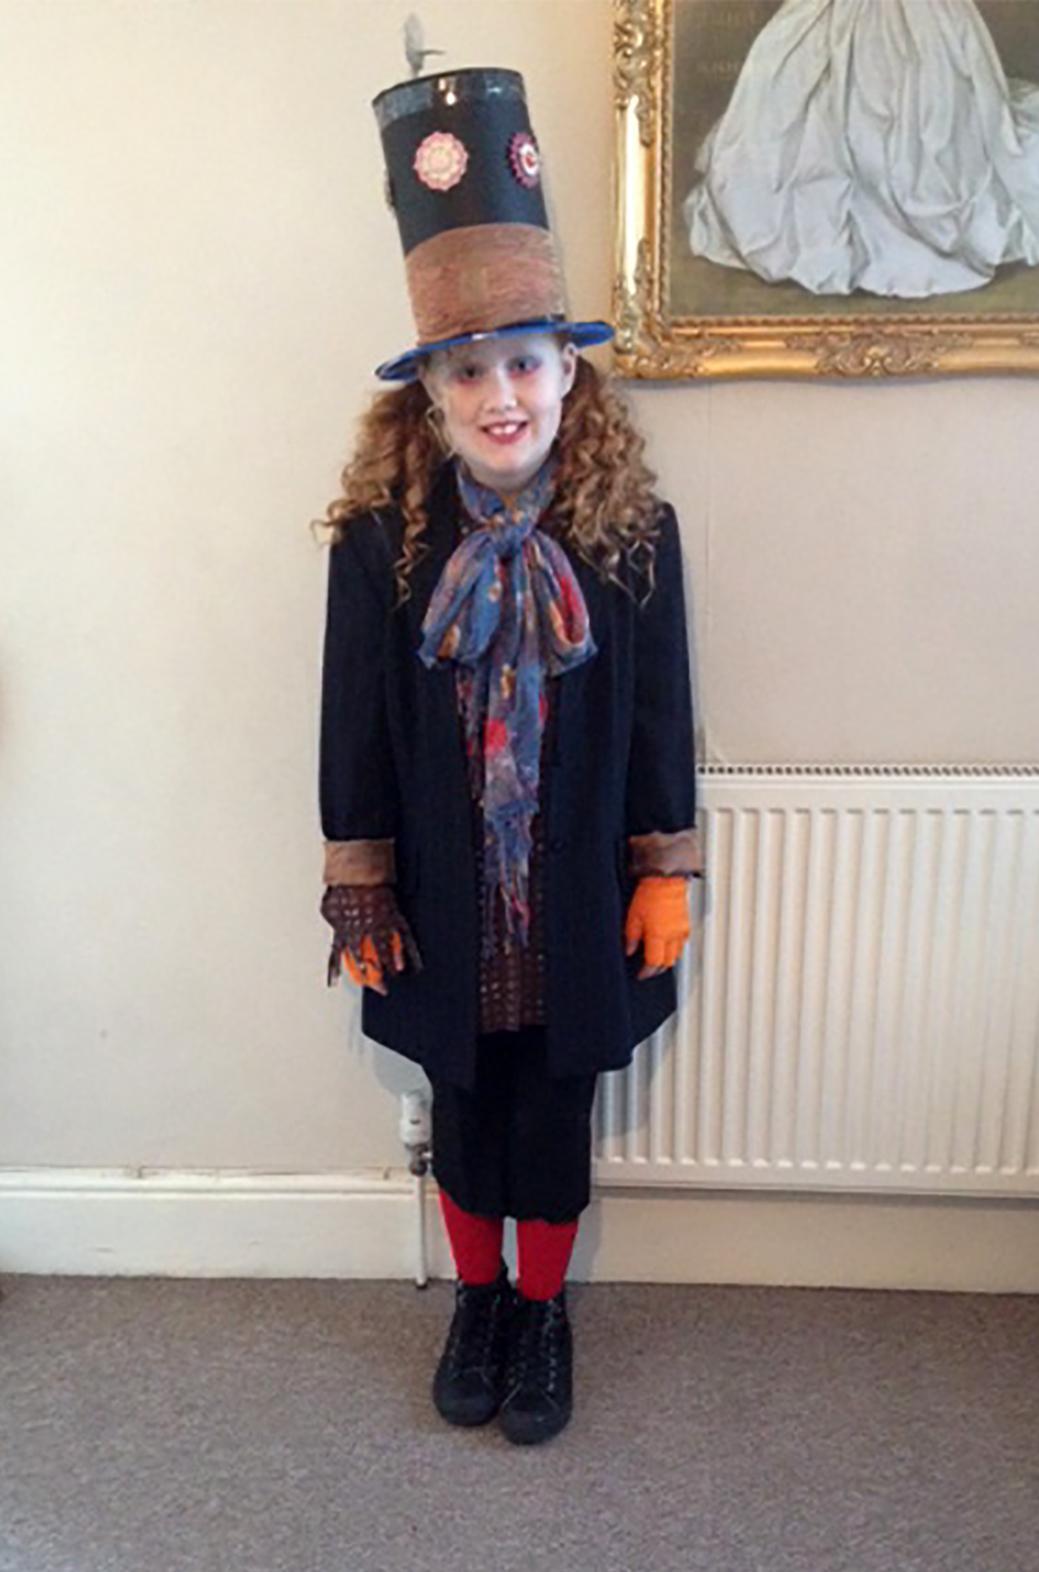 Megan, 9, as the Mad Hatter